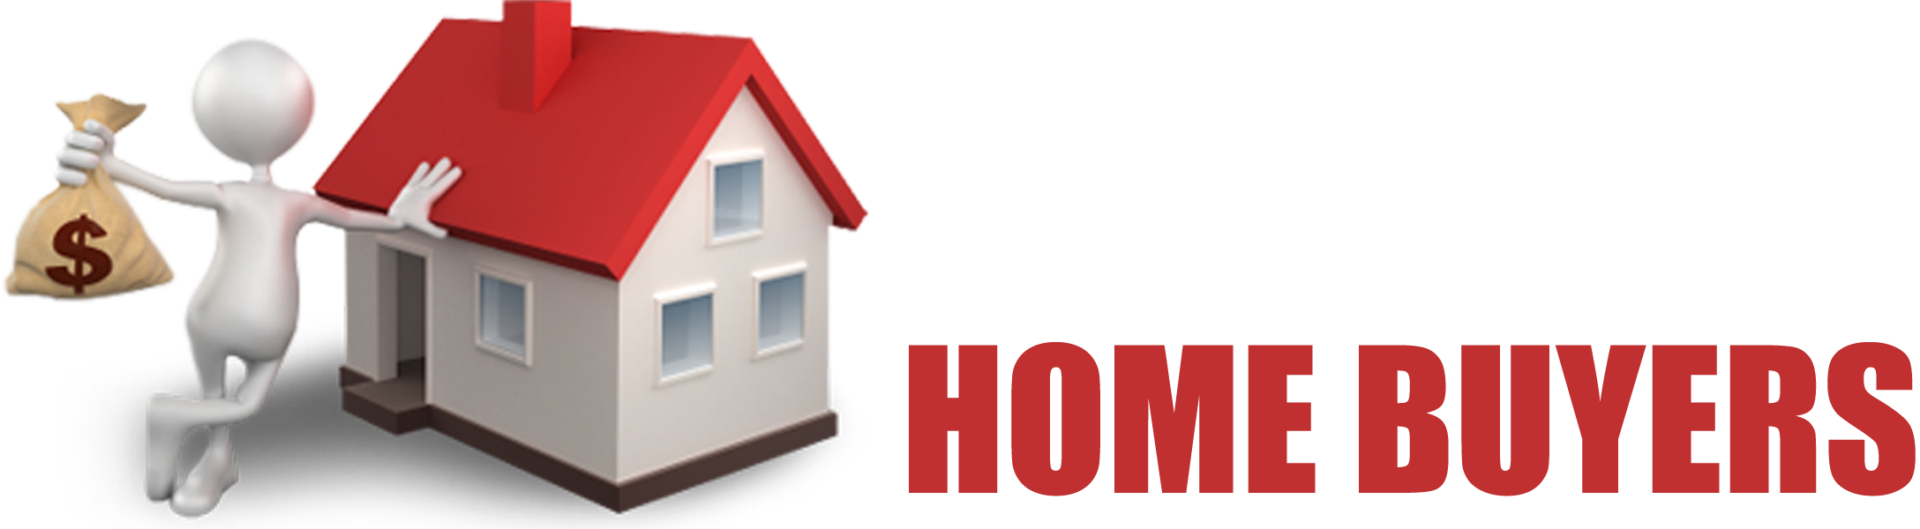 BAM Home Buyers | We Buy Houses Chicago | Sell My House Fast logo